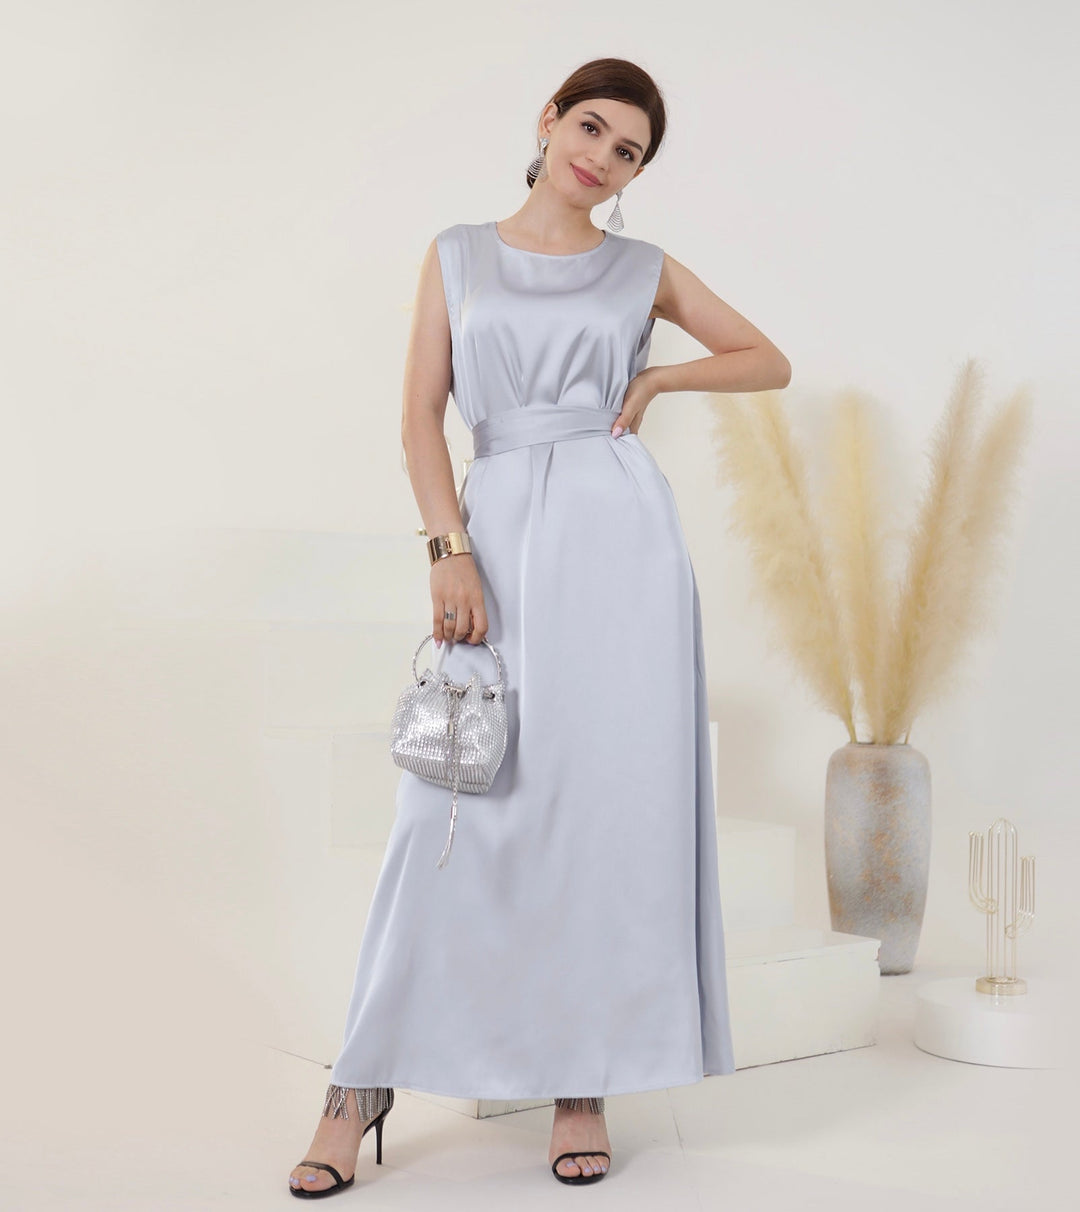 Get trendy with Lola  3-piece Set - Silver - Dresses available at Voilee NY. Grab yours for $110 today!